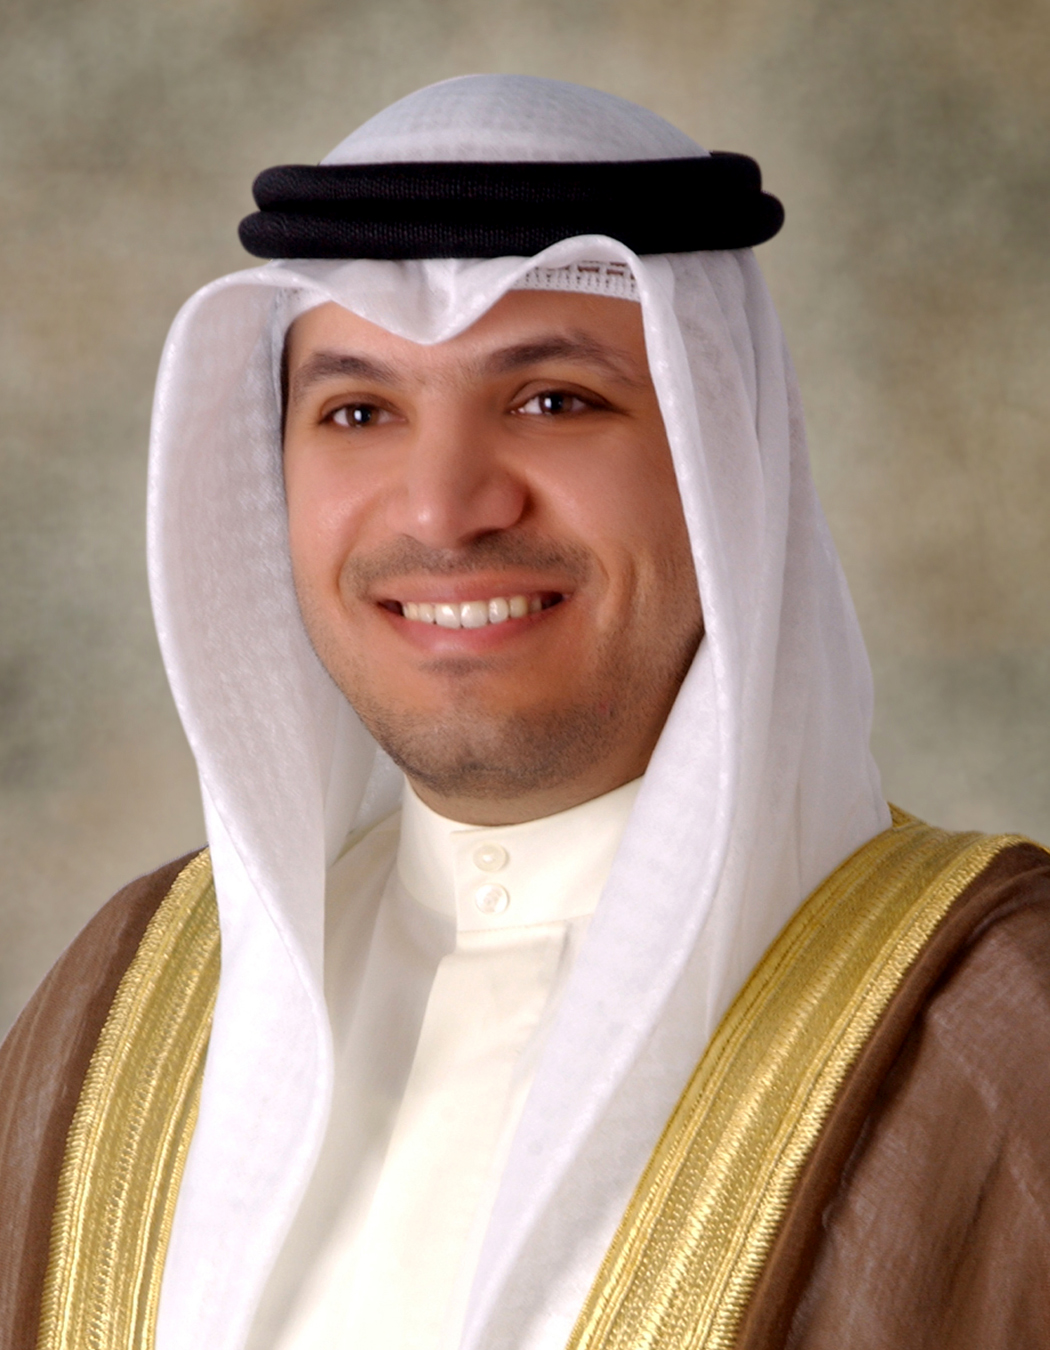 The Governor of the Central Bank of Kuwait (CBK) Dr. Mohammad Al-Hashel